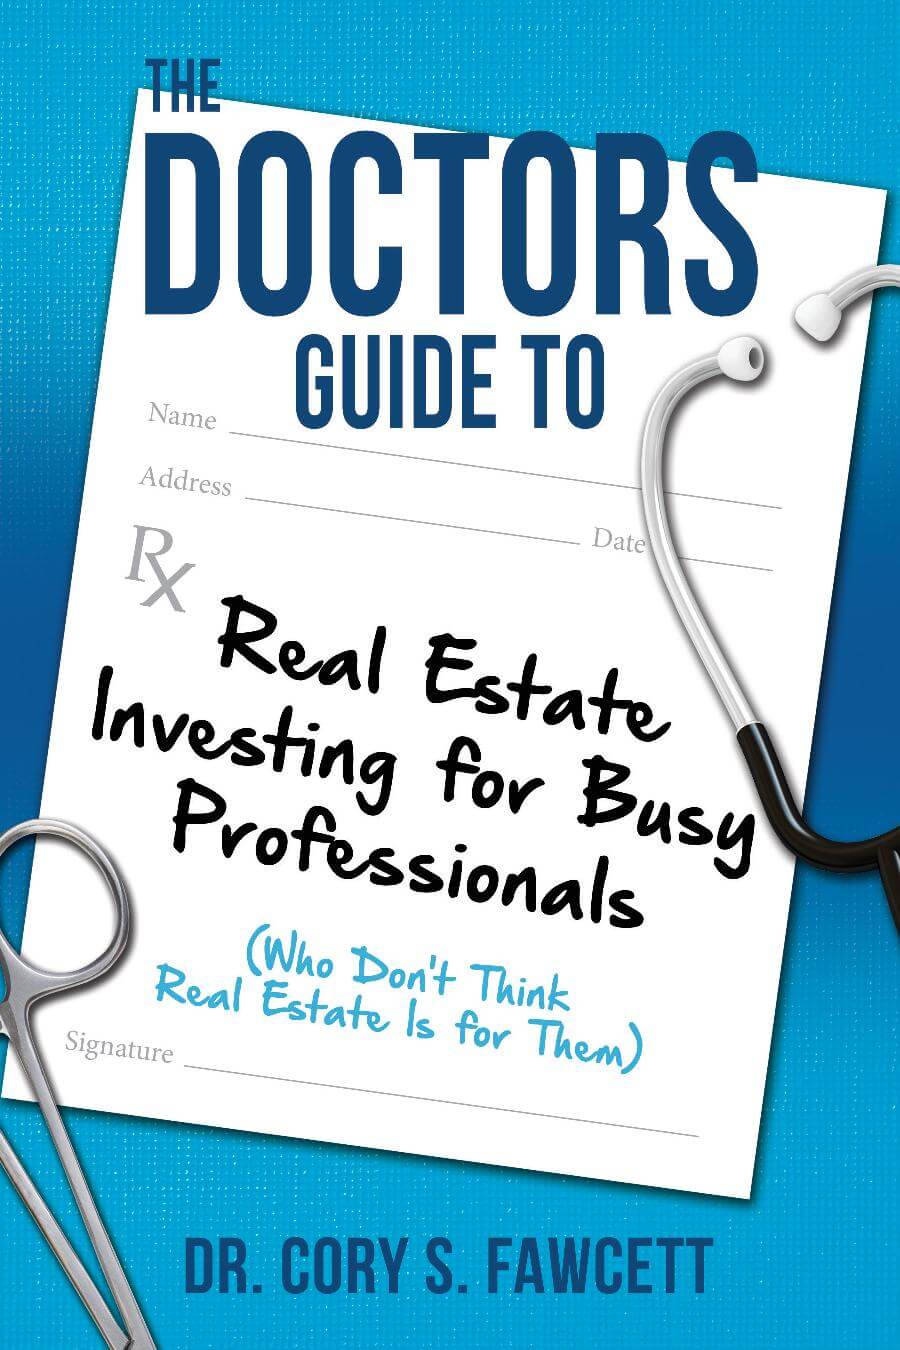 DOCTORS GUIDE TO DR. CORY S. FAWCETT Real Estate Investing for Busy Professionals (Who Don’t Think Real Estate Is for Them)